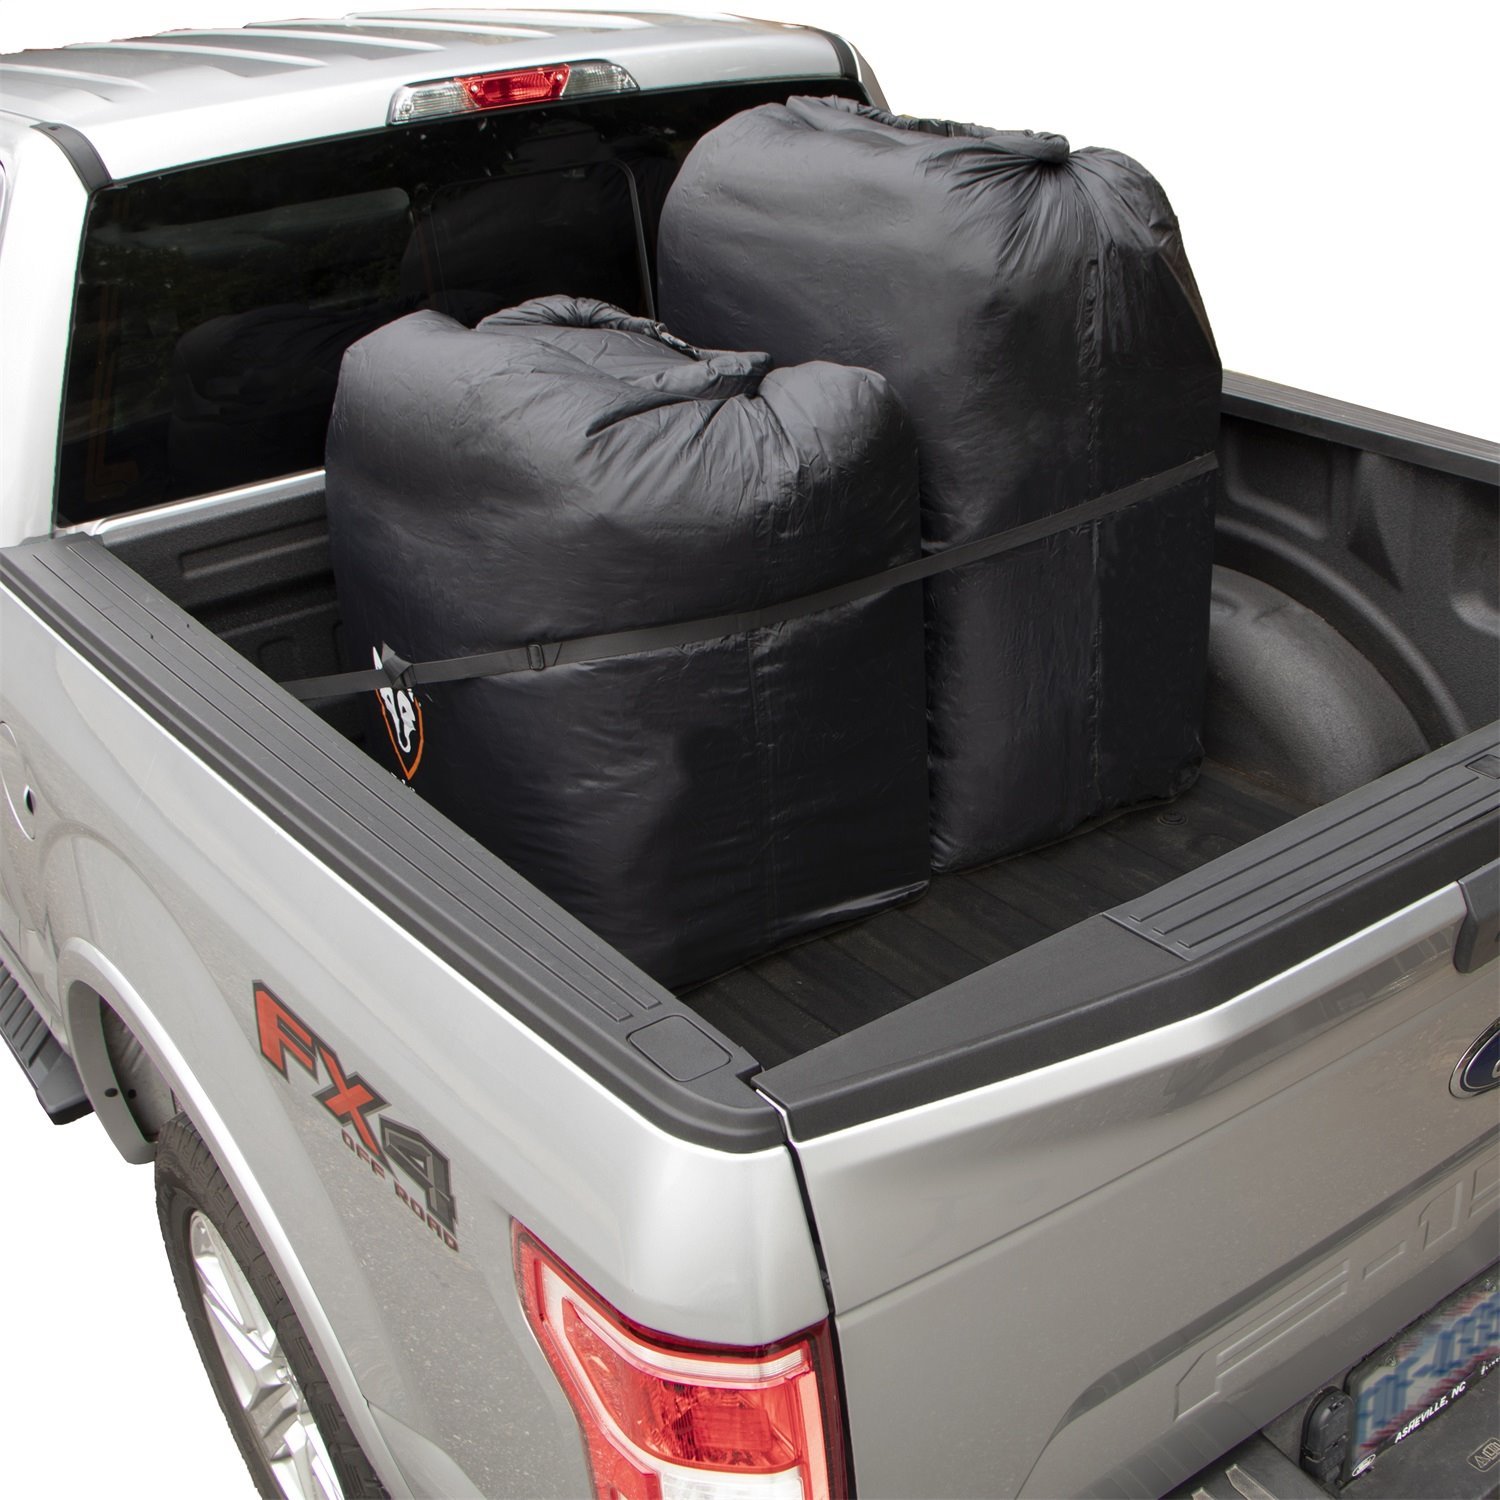 100T63 Cargo Dry Bags, 17 Cubic ft. Capacity